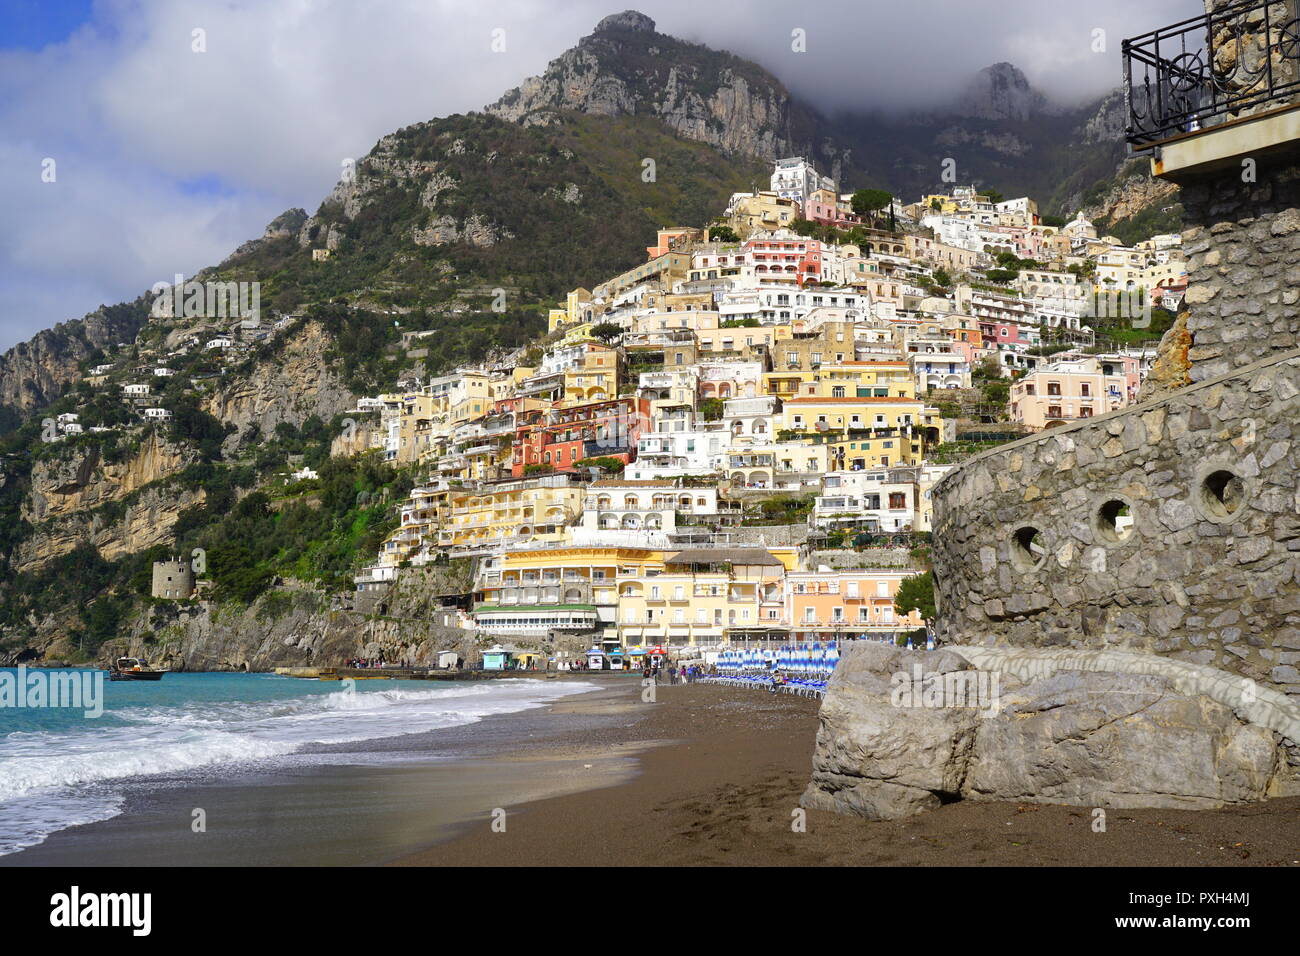 Beach with the backdrop of colorful homes on a steep mountain in Positano, a cliffside village on southern Italy's Amalfi Coast Stock Photo